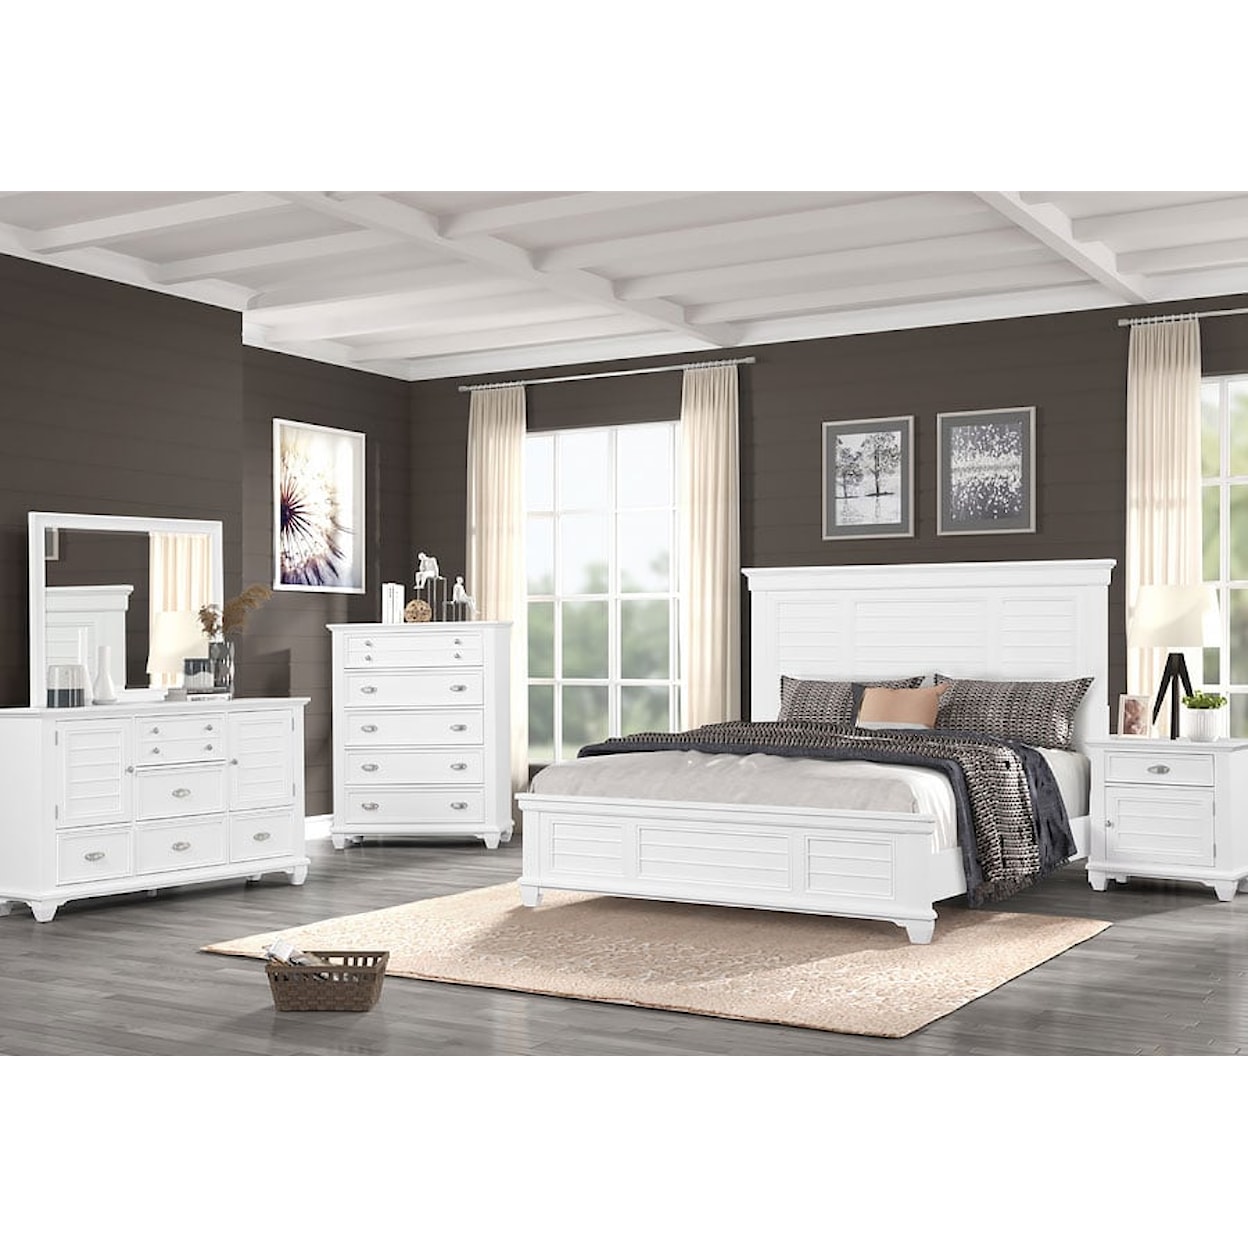 New Classic Jamestown 5PC  KING BEDROOM GROUP